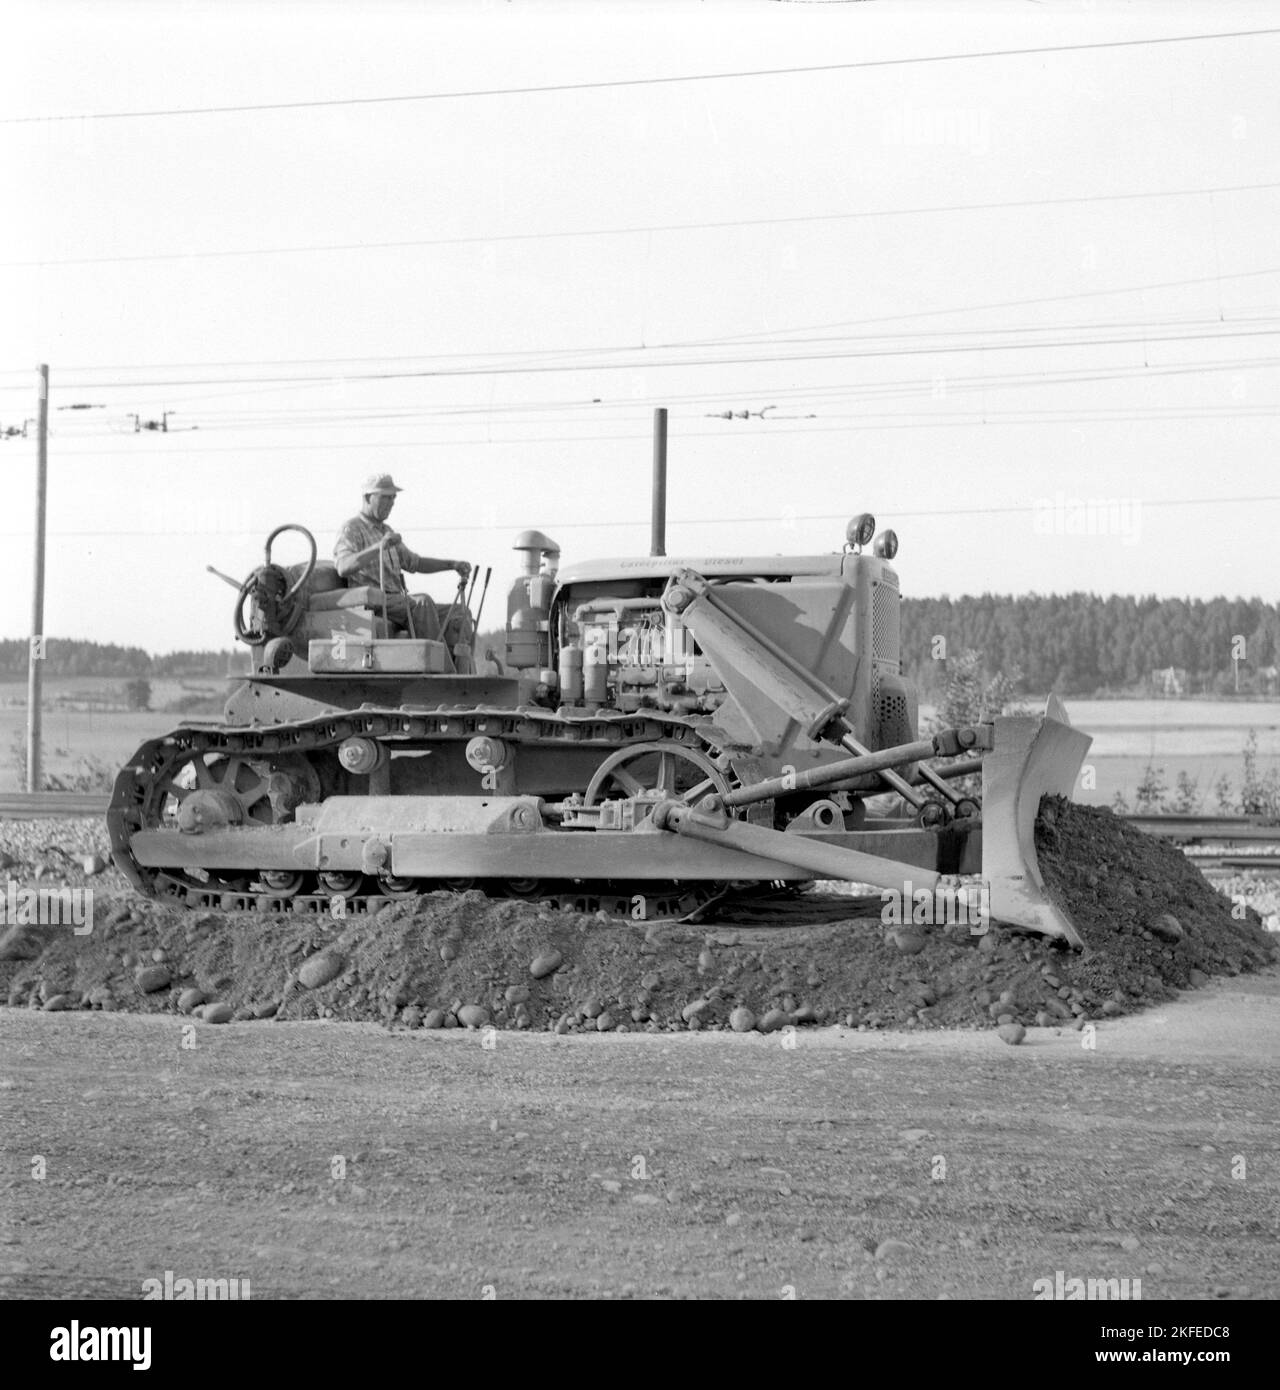 In the 1950s. The heavy machinery, a bulldozer looks gigantic when comparing to hte man sitting in the drivers seat with cabin or protection around him. It's a 20 tons Caterpillar Diesel model  D7, 240 hp engine. Cat is short for Caterpillar. Picture is taken on a railway construction site when the bulldozer flattens and spreads the material used to laying railway tracks on. Sweden august 1955 Stock Photo